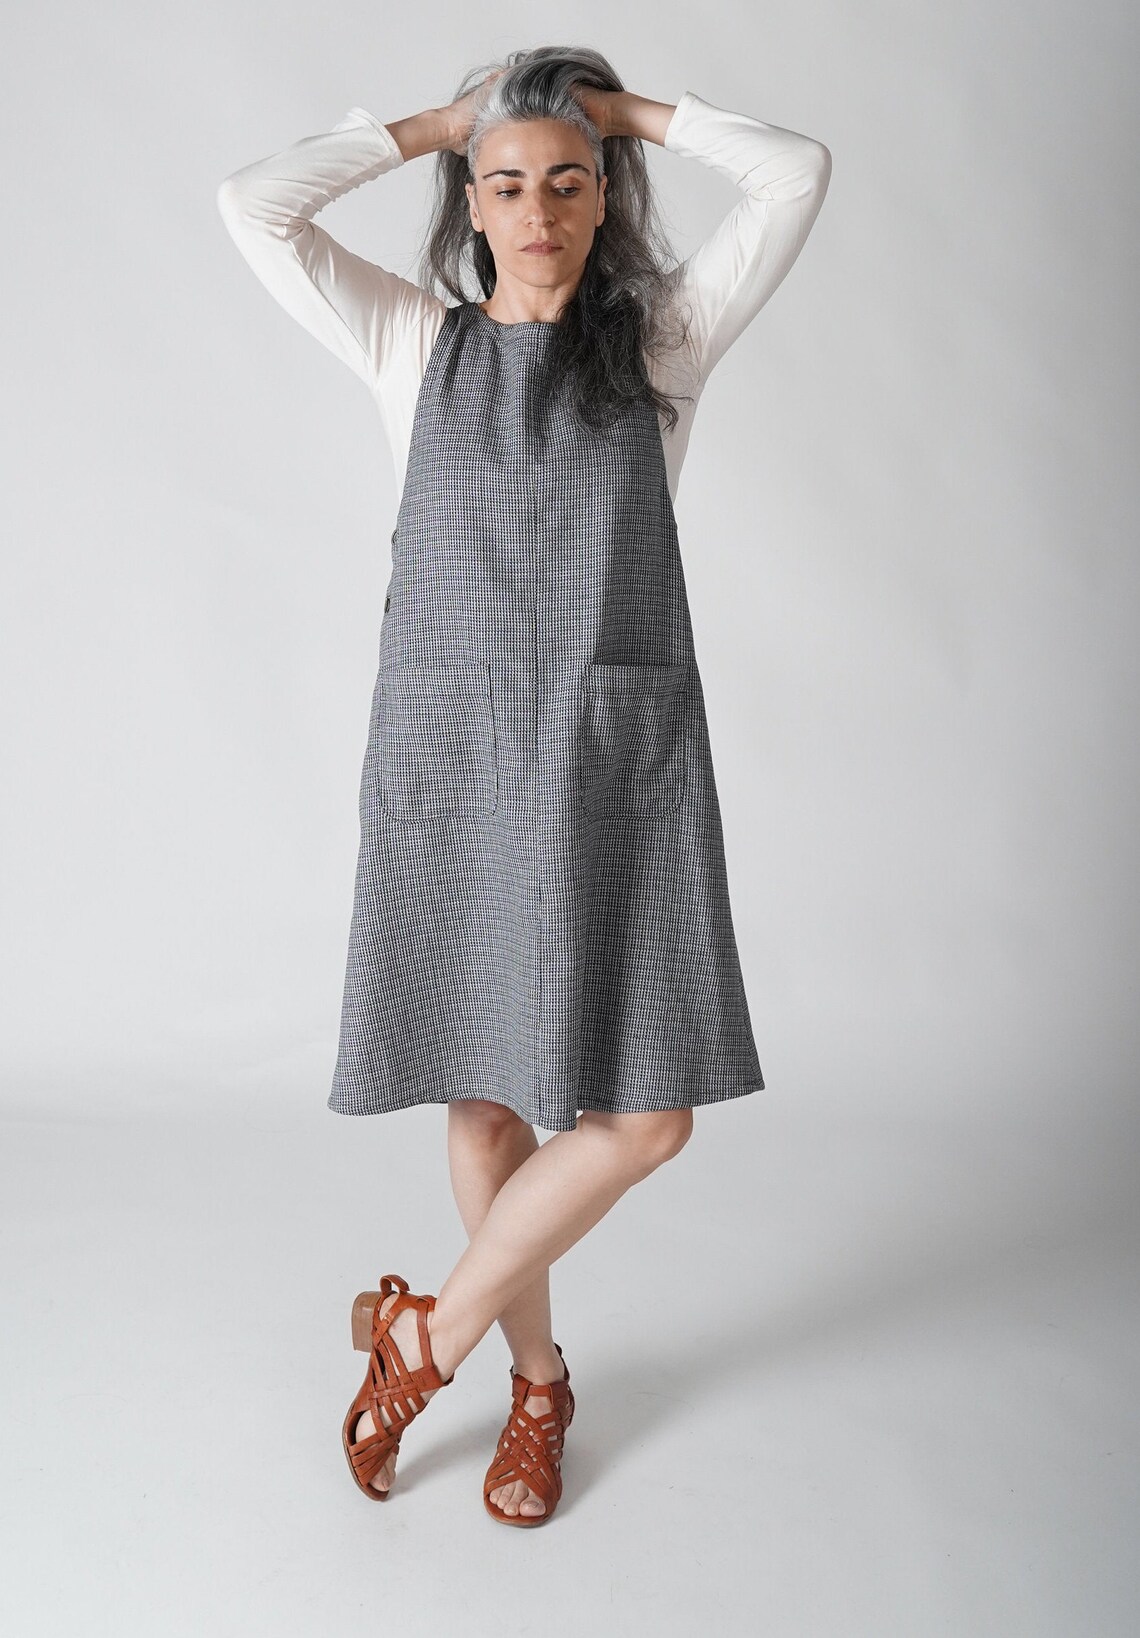 Apron Dress With Pockets, Blue and White Check Pinafore Dress, Cotton ...